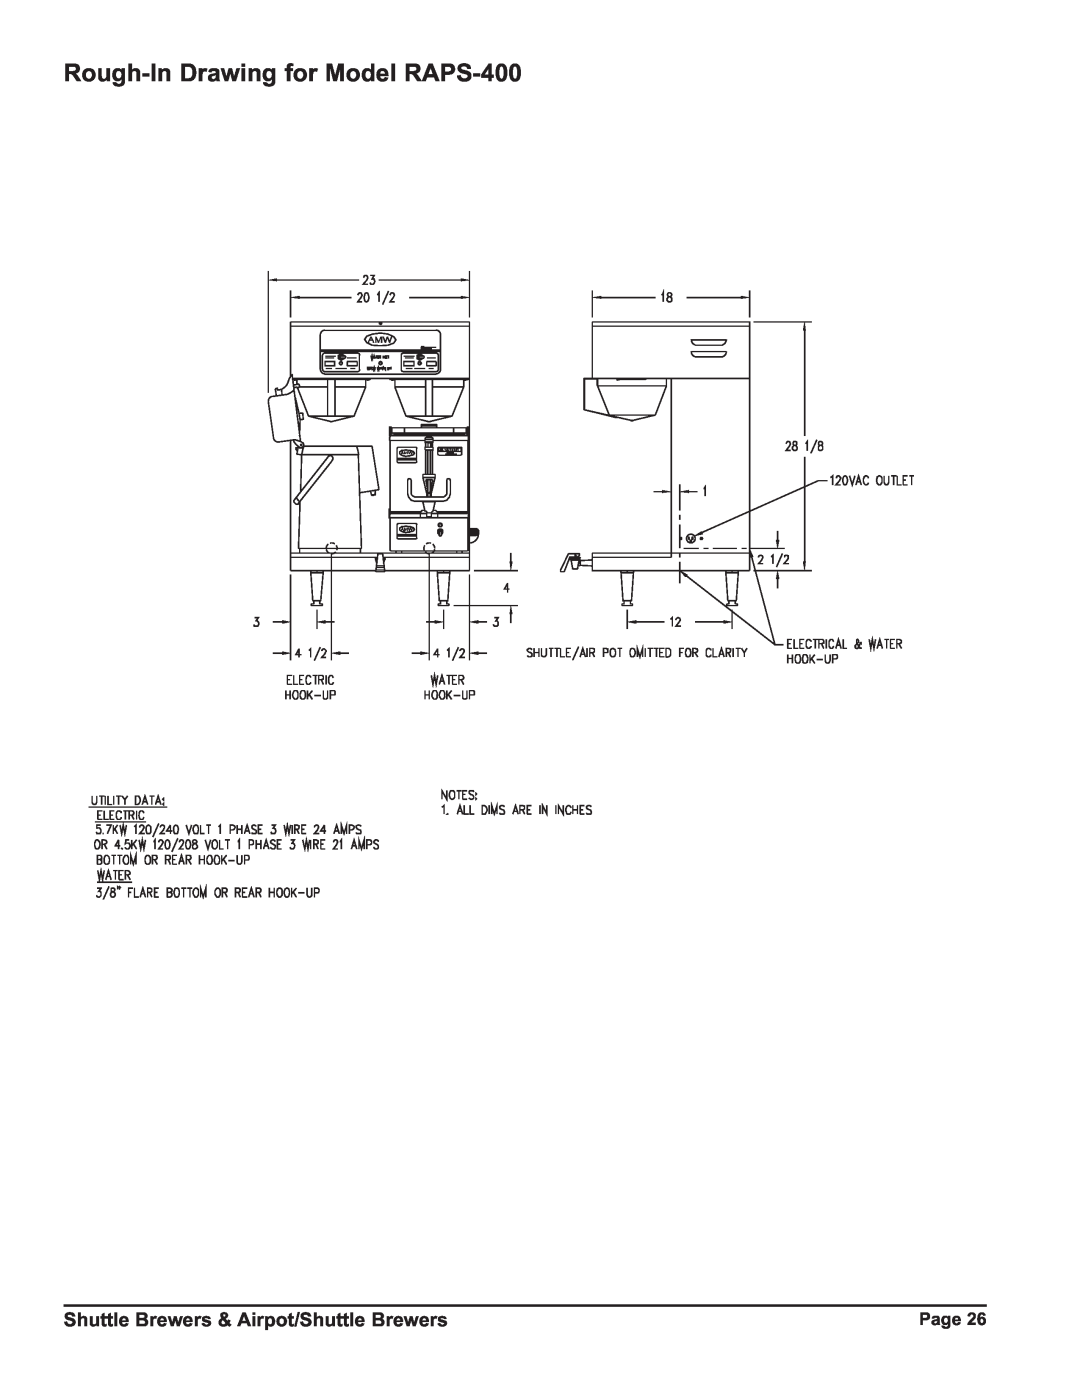 Grindmaster P400ESHP instruction manual Rough-In Drawing for Model RAPS-400, Shuttle Brewers & Airpot/Shuttle Brewers, Page 